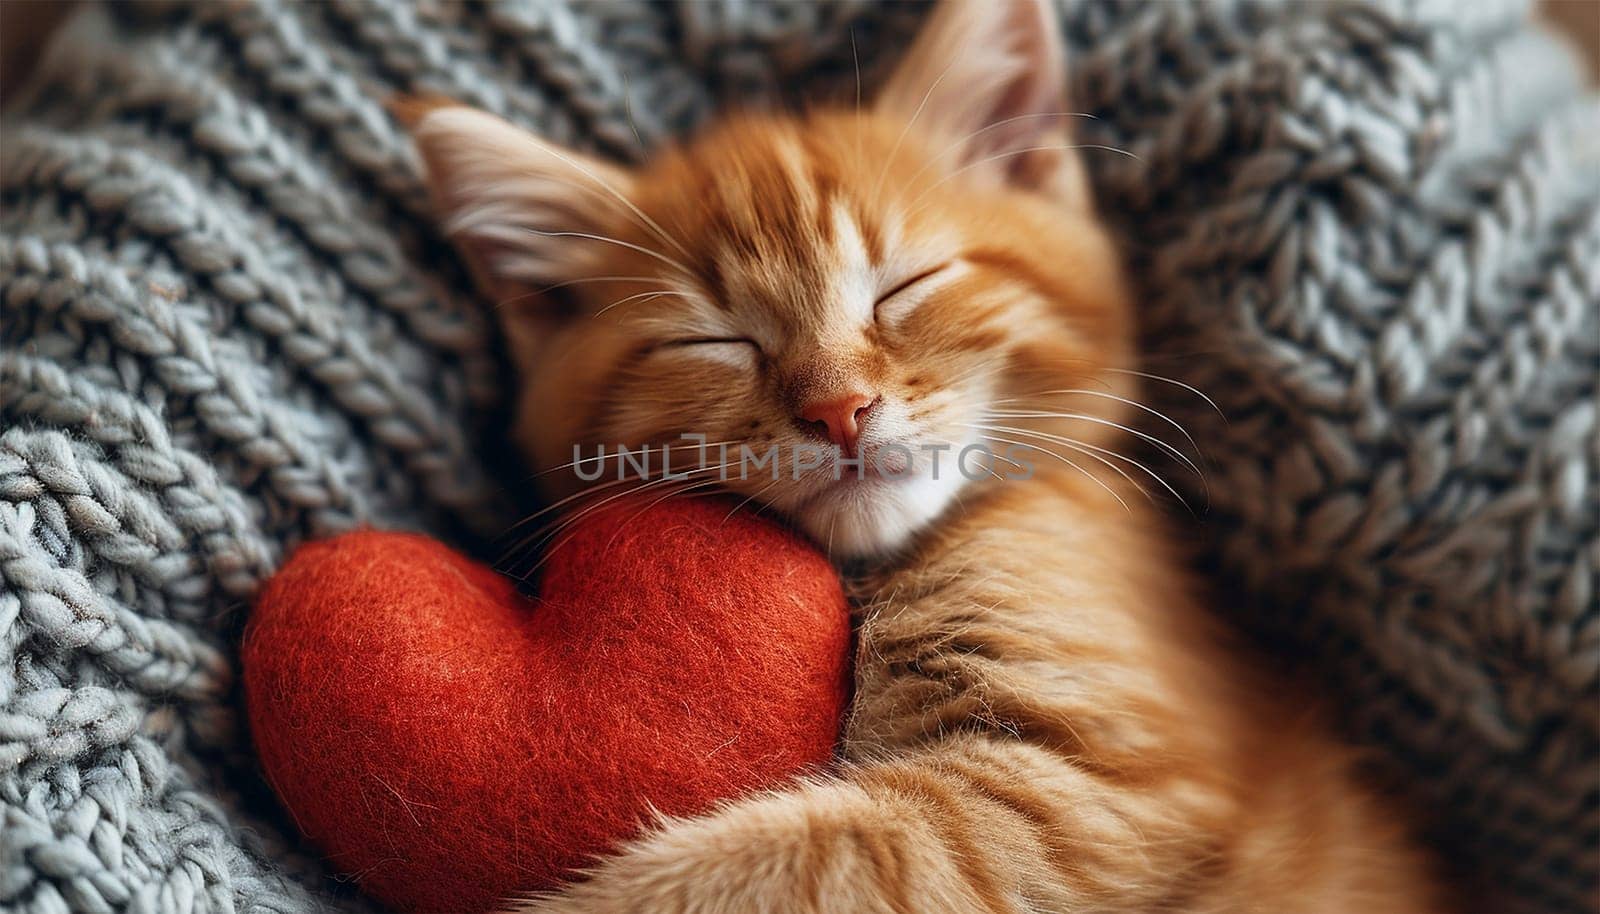 Cute tabby kitten sleeping on red heart pillow. Little kitten sleeping on the red heart-shaped pillow. Cozy blanket. Happy Valentines Day by Annebel146